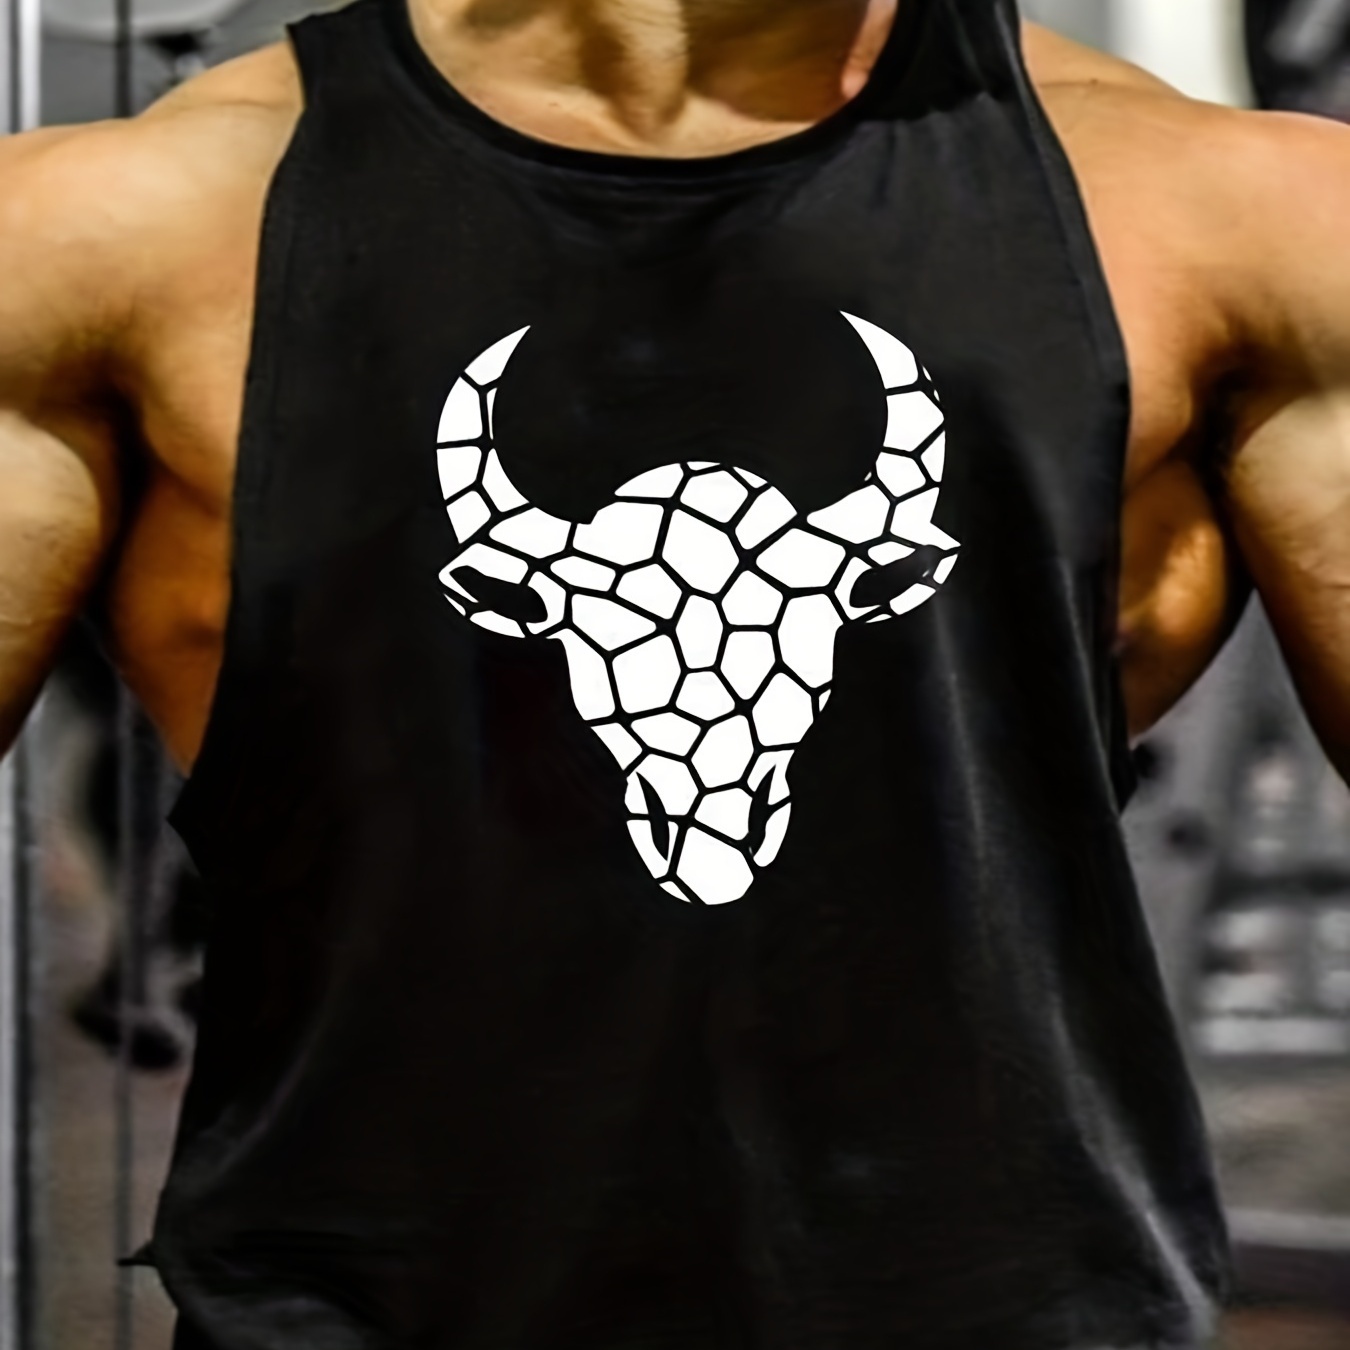 

Men's Casual Bull Element Graphic Print Sleeveless Tank Tops, Summer Oversized Loose Vest For Fitness, Workout, Training Plus Size